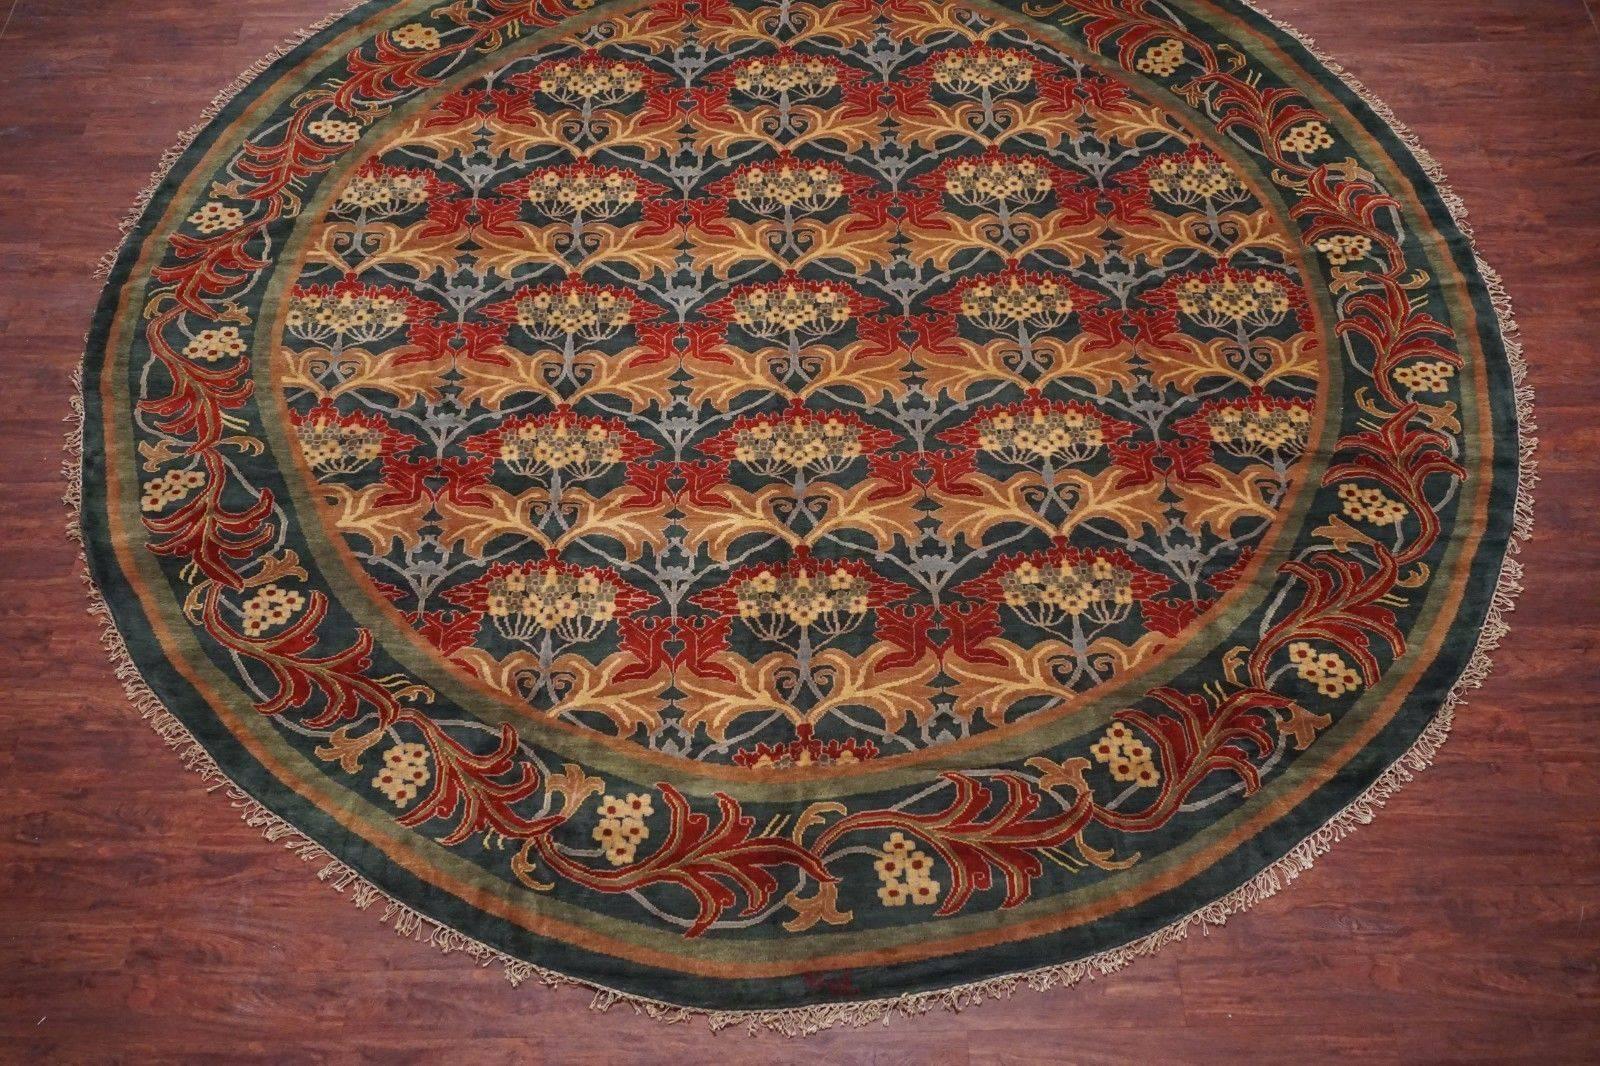 Round William Morris Inspired Rug, signed by weaver,

circa 1990

Measures: 13' 8